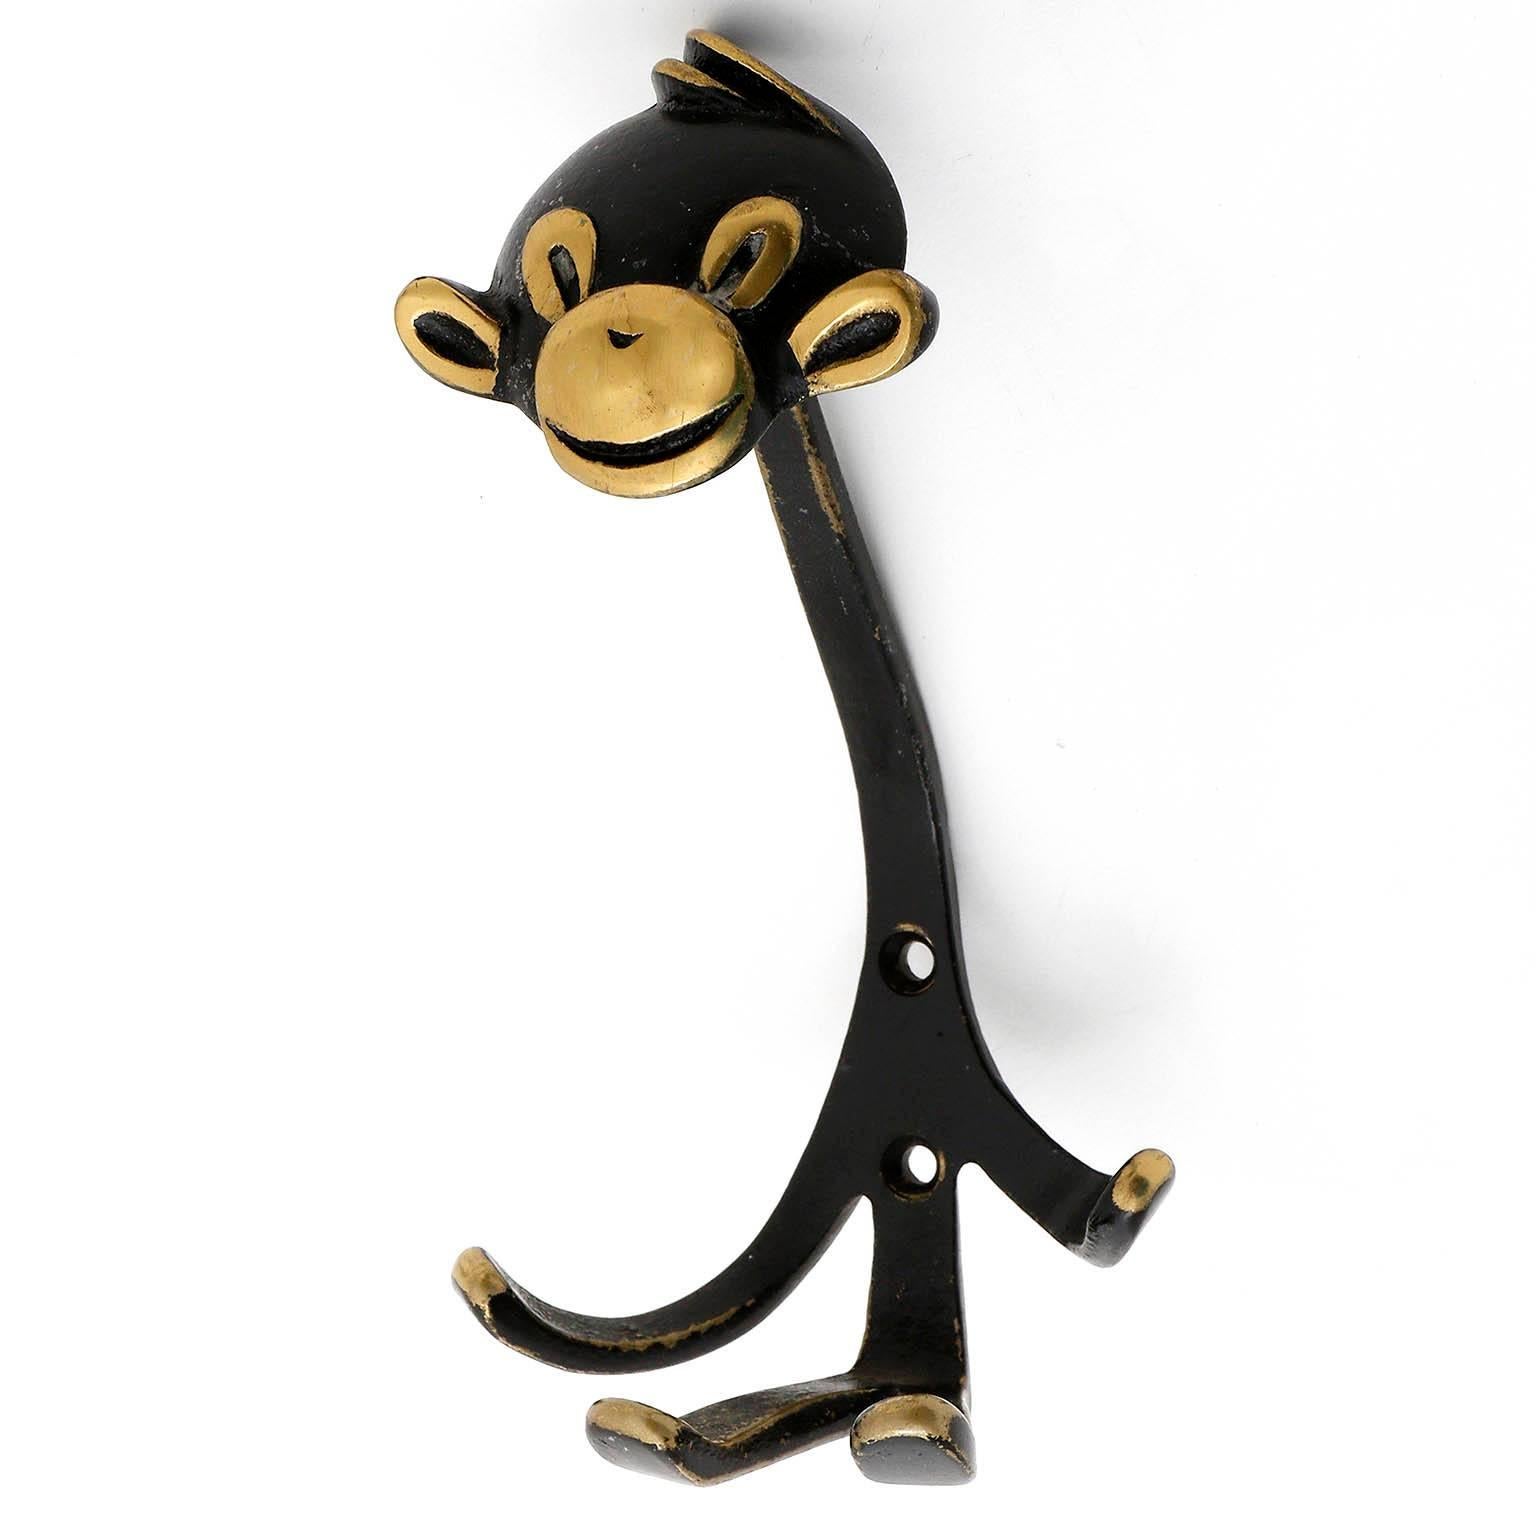 A coat wall hook in the form of a monkey by Walter Bosse, Austria, manufactured in Mid-Century in 1950s.
It is made of blackened and partly polished brass. Wear of use, lovely patina.

There are also other animal hooks in the form of a goat, a